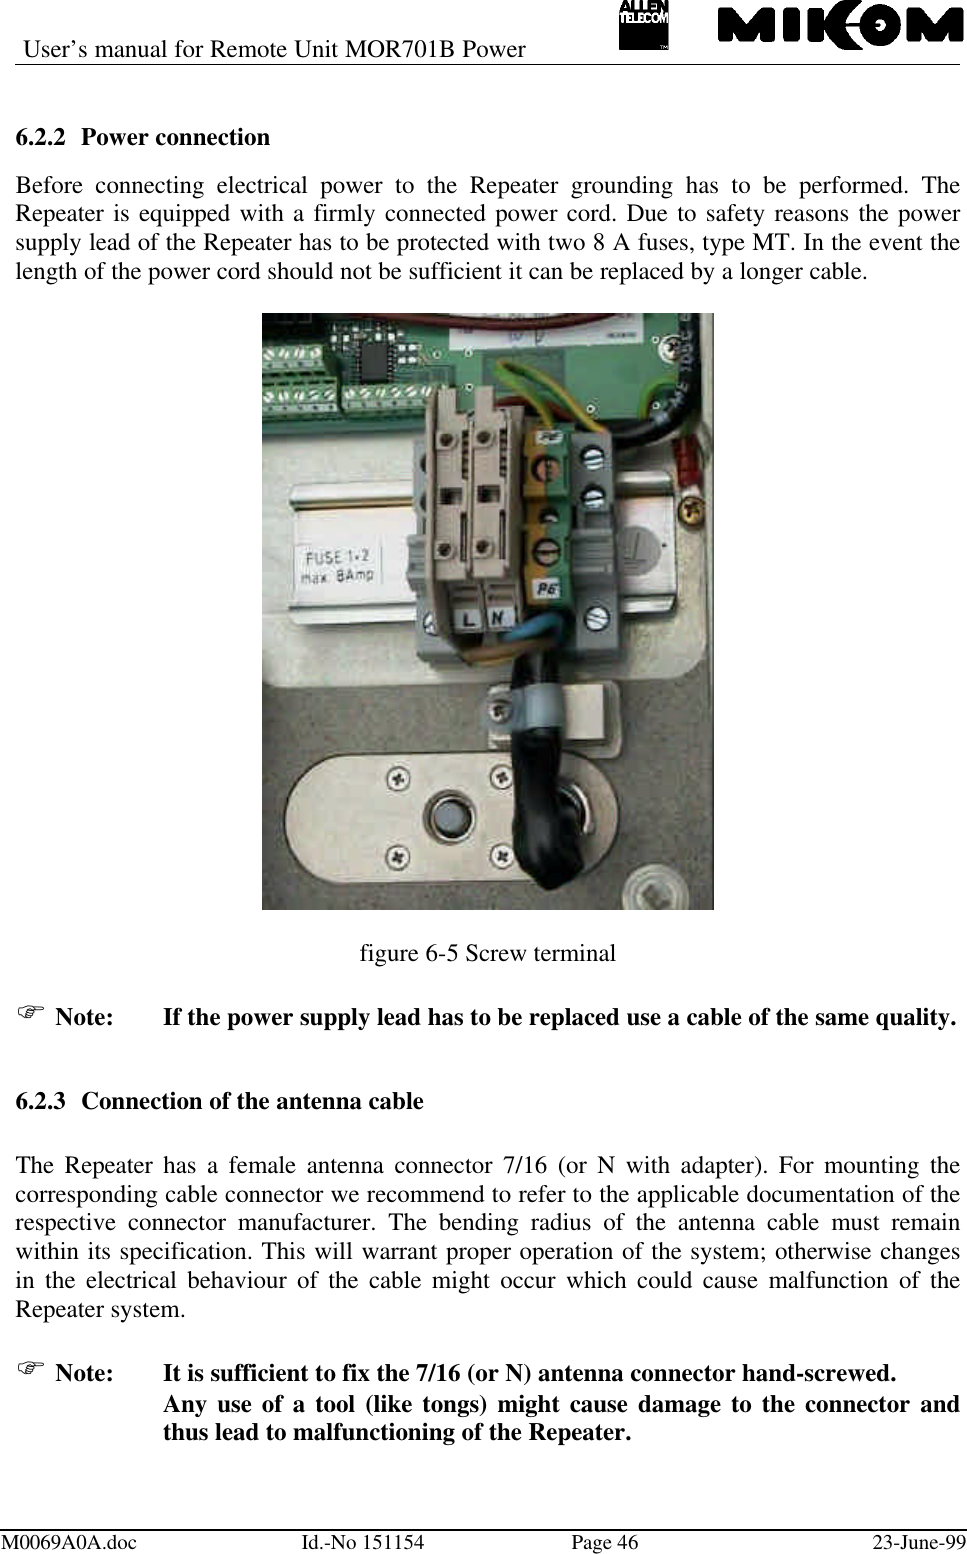 User’s manual for Remote Unit MOR701B PowerM0069A0A.doc Id.-No 151154 Page 46 23-June-996.2.2 Power connectionBefore connecting electrical power to the Repeater grounding has to be performed. TheRepeater is equipped with a firmly connected power cord. Due to safety reasons the powersupply lead of the Repeater has to be protected with two 8 A fuses, type MT. In the event thelength of the power cord should not be sufficient it can be replaced by a longer cable.figure 6-5 Screw terminalF Note: If the power supply lead has to be replaced use a cable of the same quality.6.2.3 Connection of the antenna cableThe Repeater has a female antenna connector 7/16 (or N with adapter). For mounting thecorresponding cable connector we recommend to refer to the applicable documentation of therespective connector manufacturer. The bending radius of the antenna cable must remainwithin its specification. This will warrant proper operation of the system; otherwise changesin the electrical behaviour of the cable might occur which could cause malfunction of theRepeater system.F Note:  It is sufficient to fix the 7/16 (or N) antenna connector hand-screwed.Any use of a tool (like tongs) might cause damage to the connector andthus lead to malfunctioning of the Repeater.